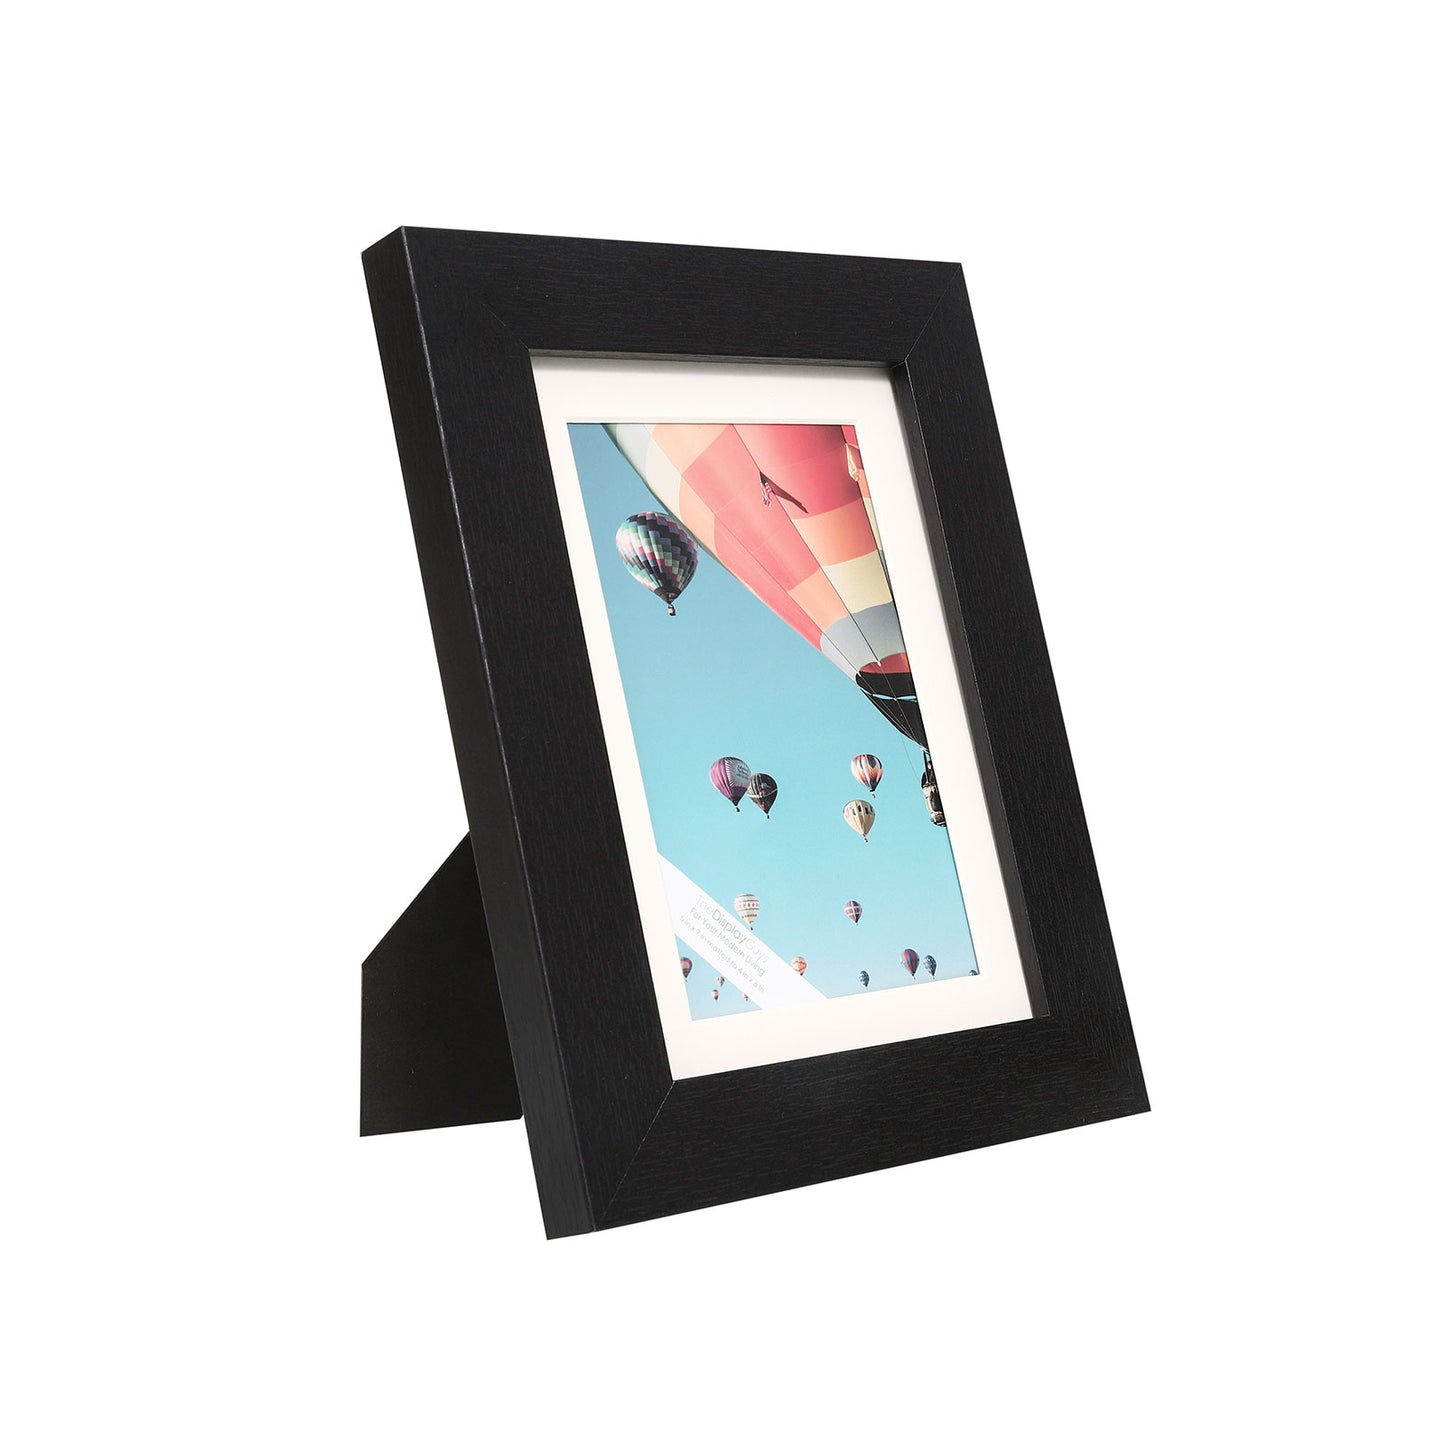 5" x 7" Black MDF Wood Picture Frame with Tempered Glass, 4" x 6" Matted